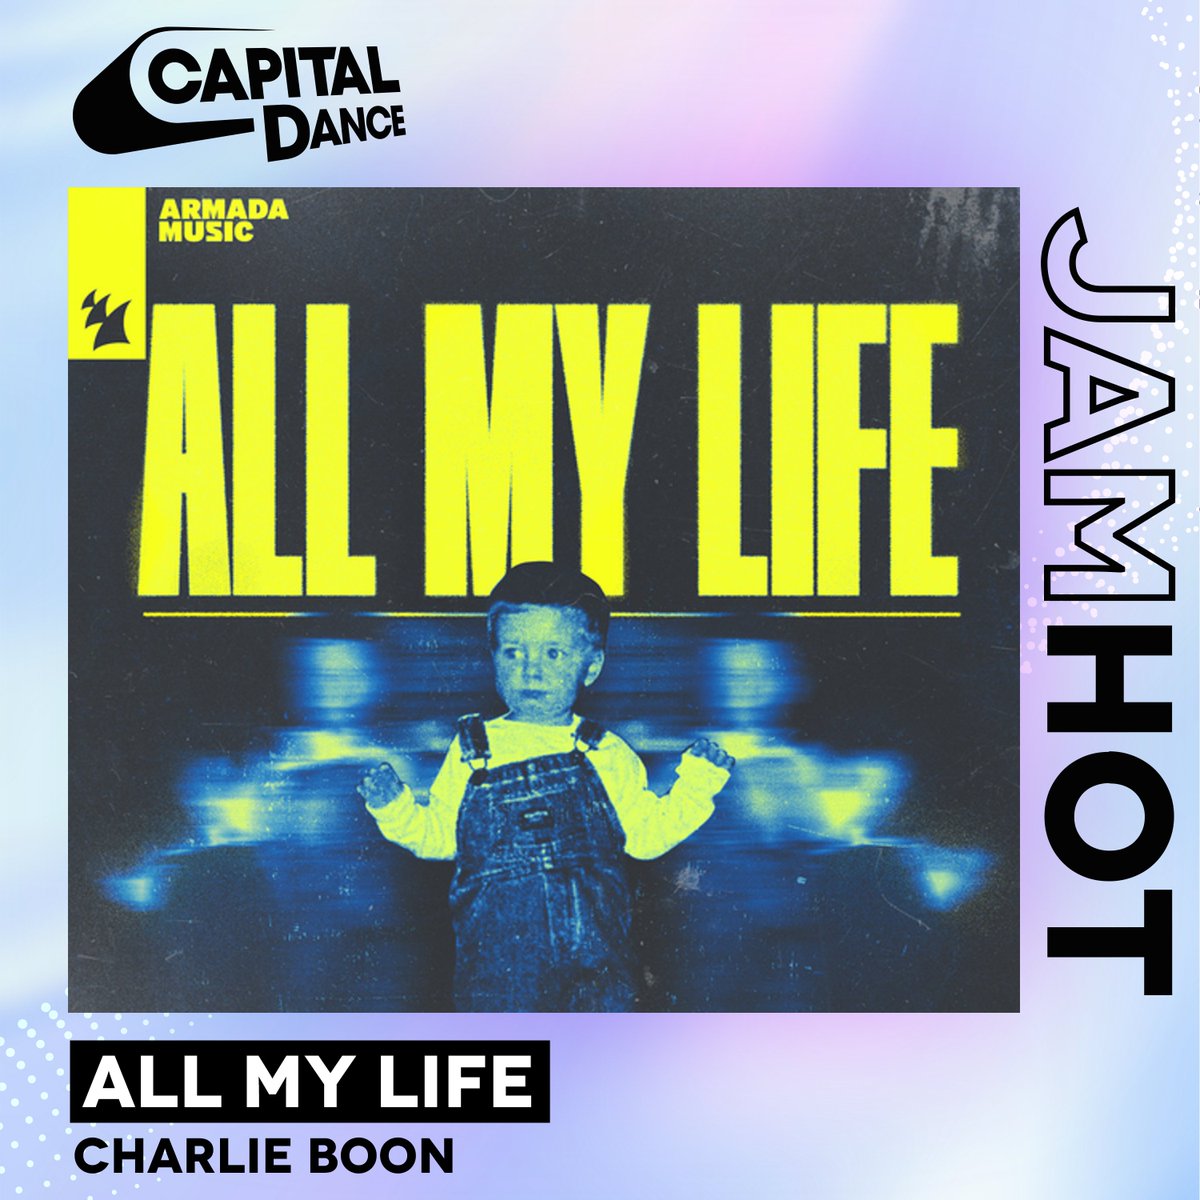 .@charlieboon__ is our JAM HOT with his belter 'All My Life' 🎧 listen on @globalplayer, the official capital dance app